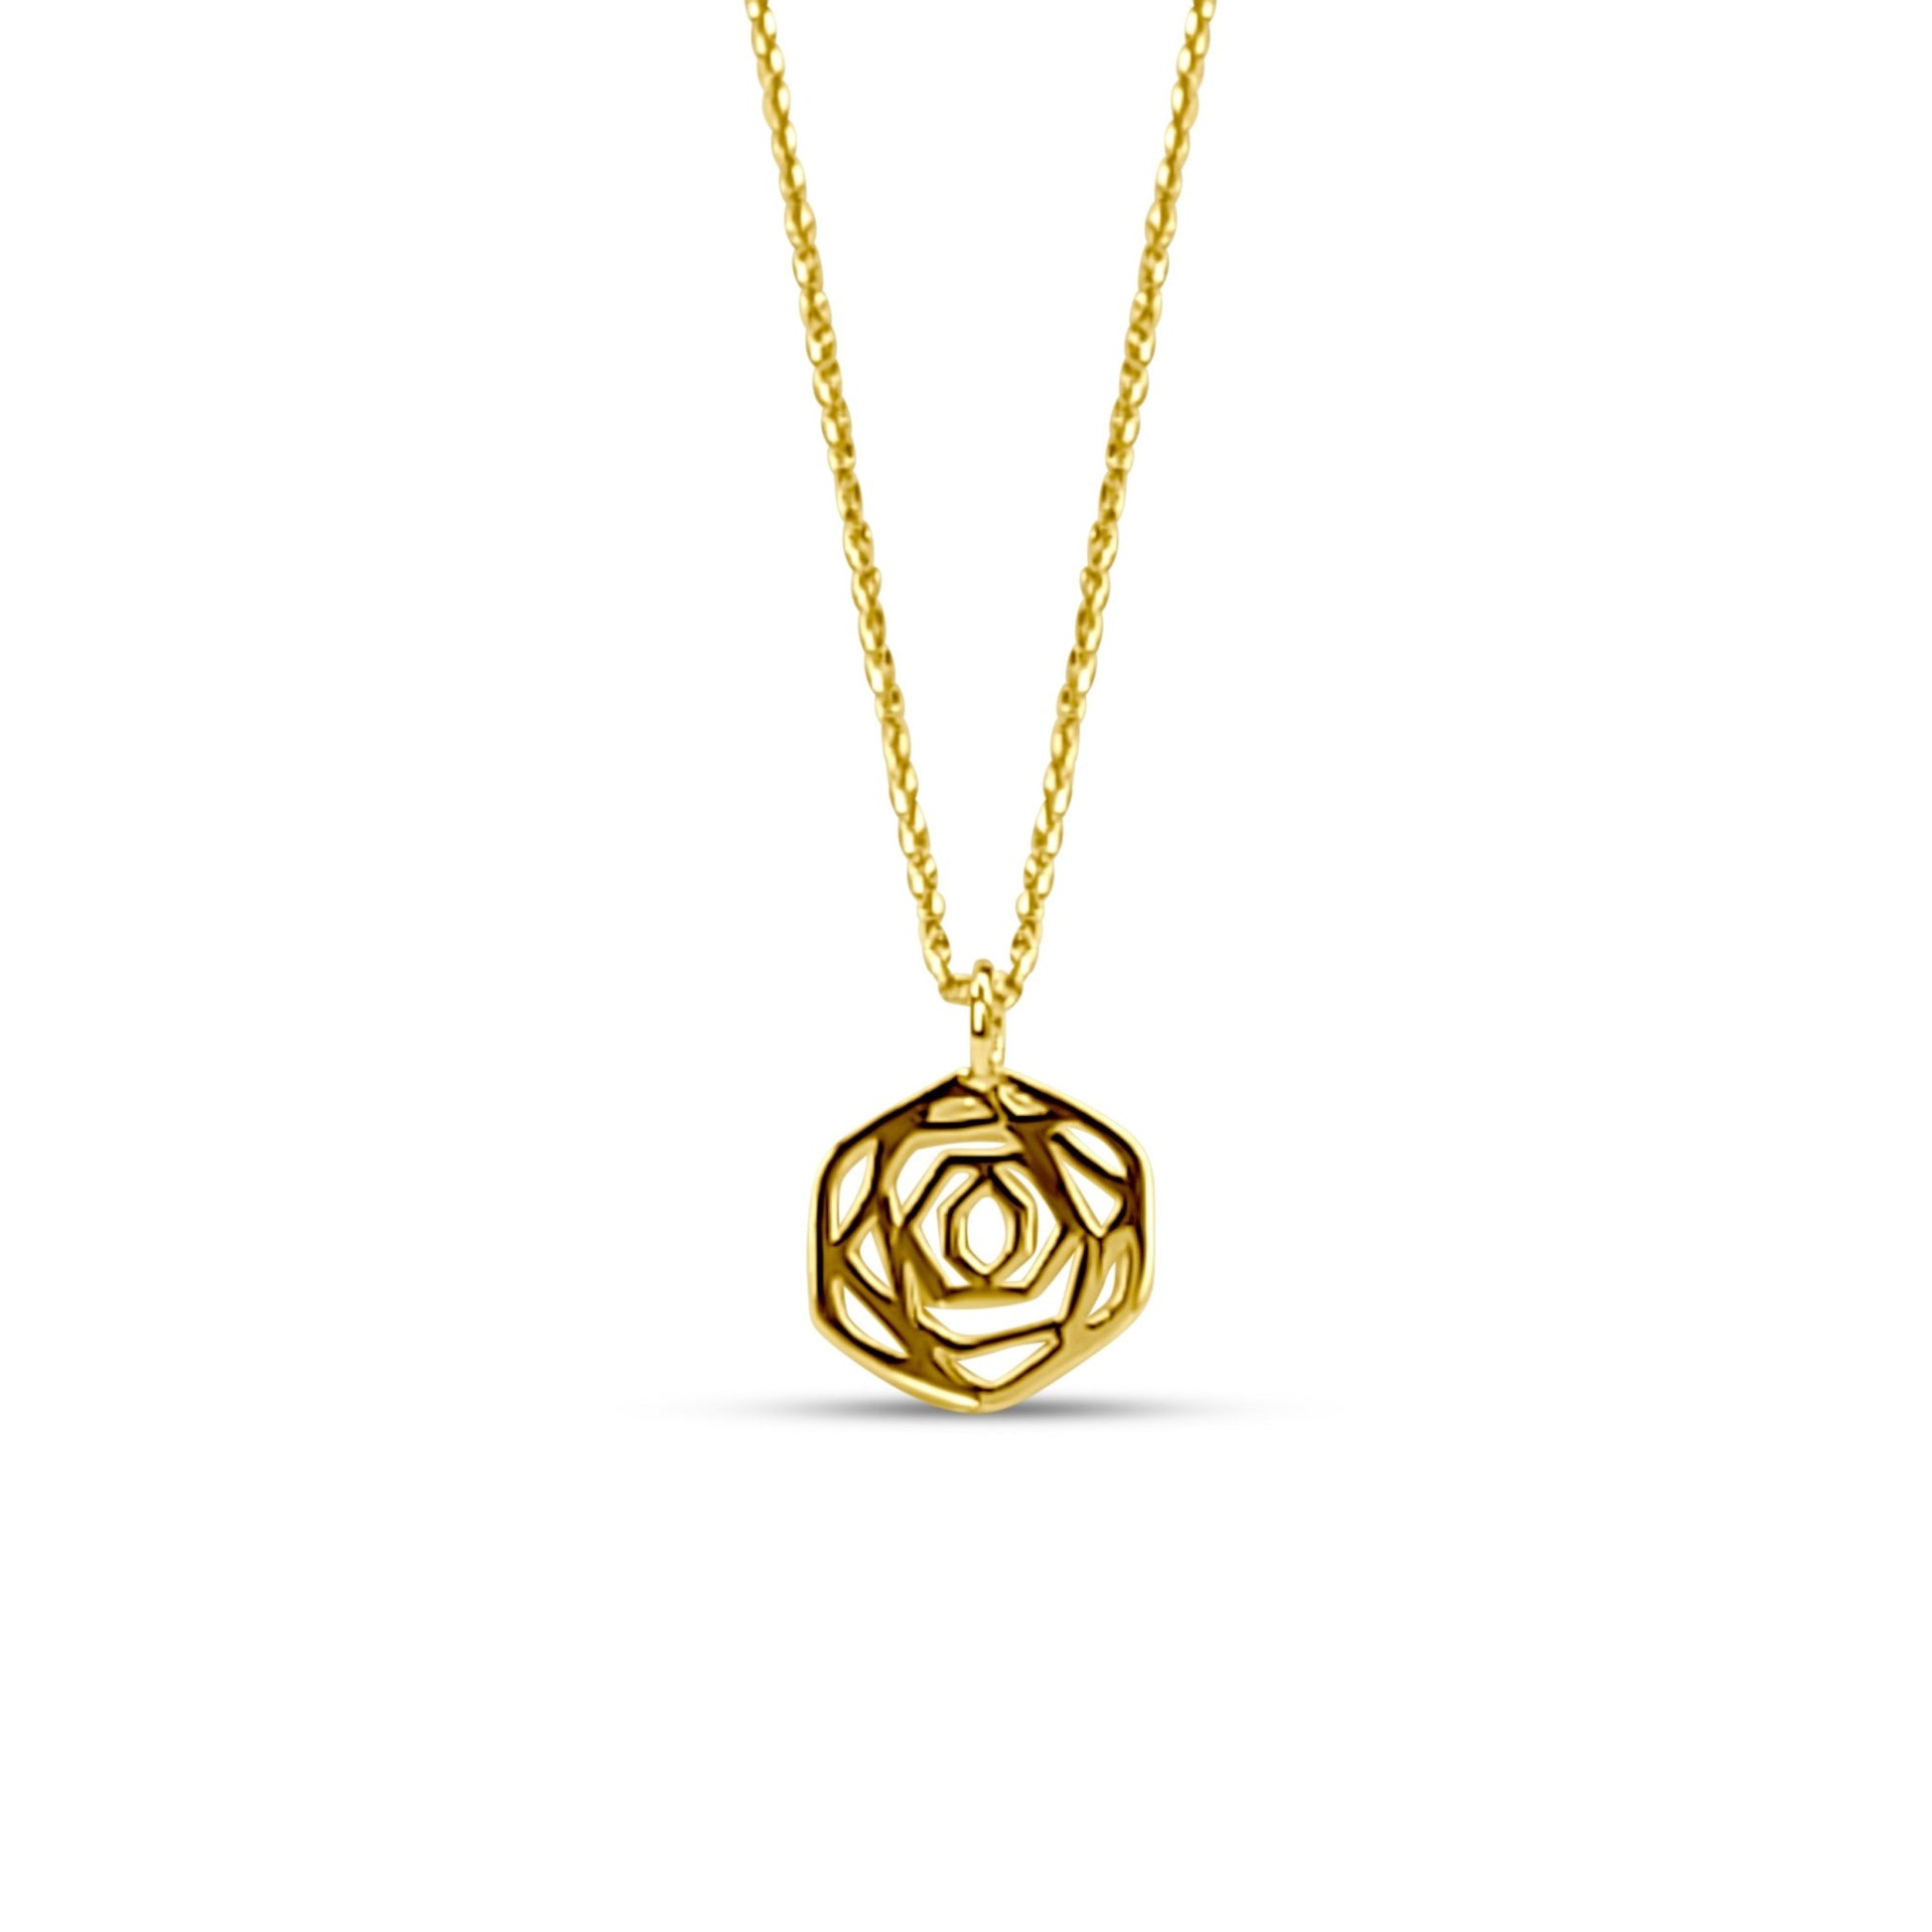 gold plated sterling silver rose flower pendant necklace